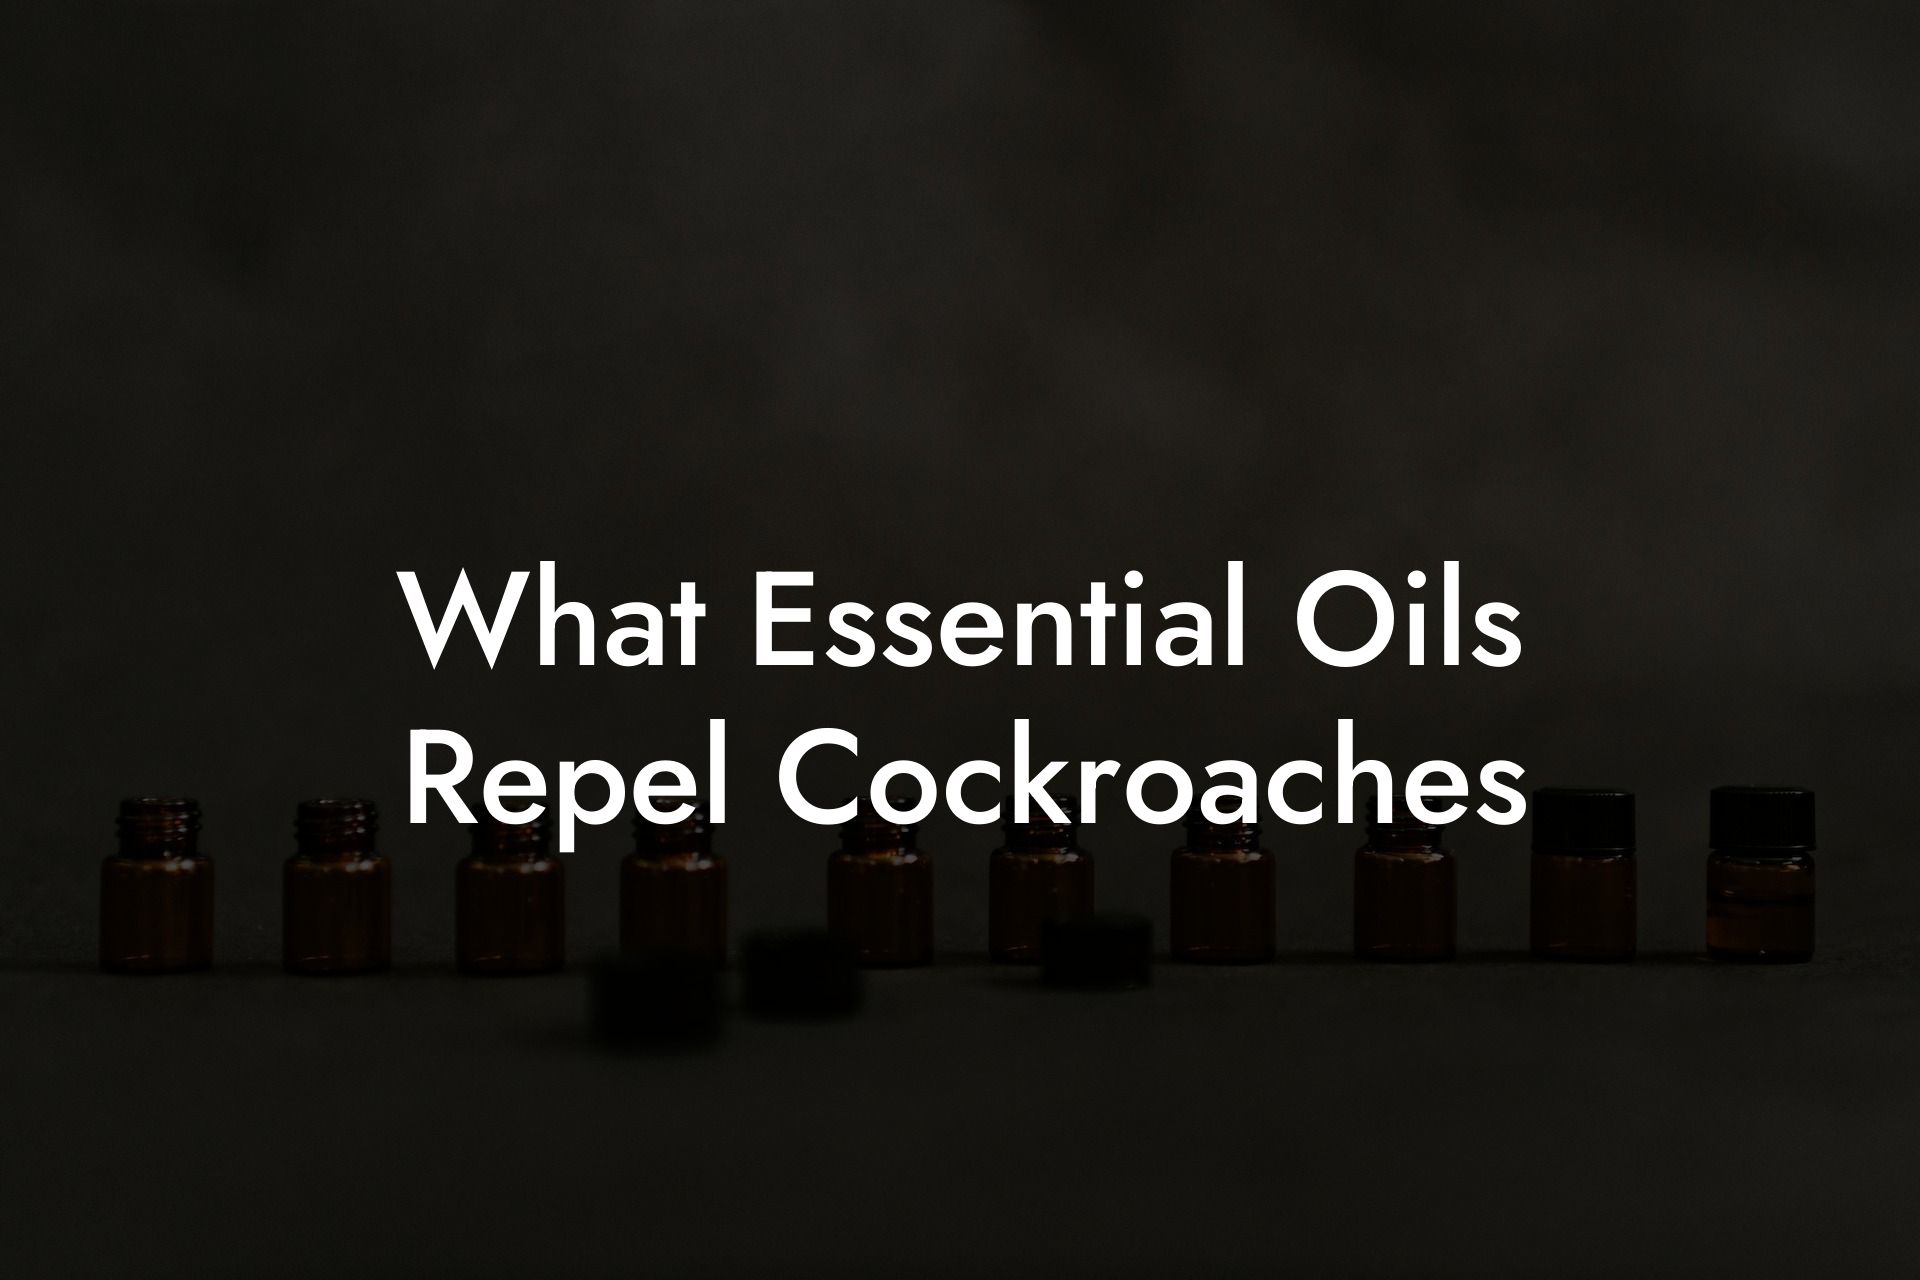 What Essential Oils Repel Cockroaches